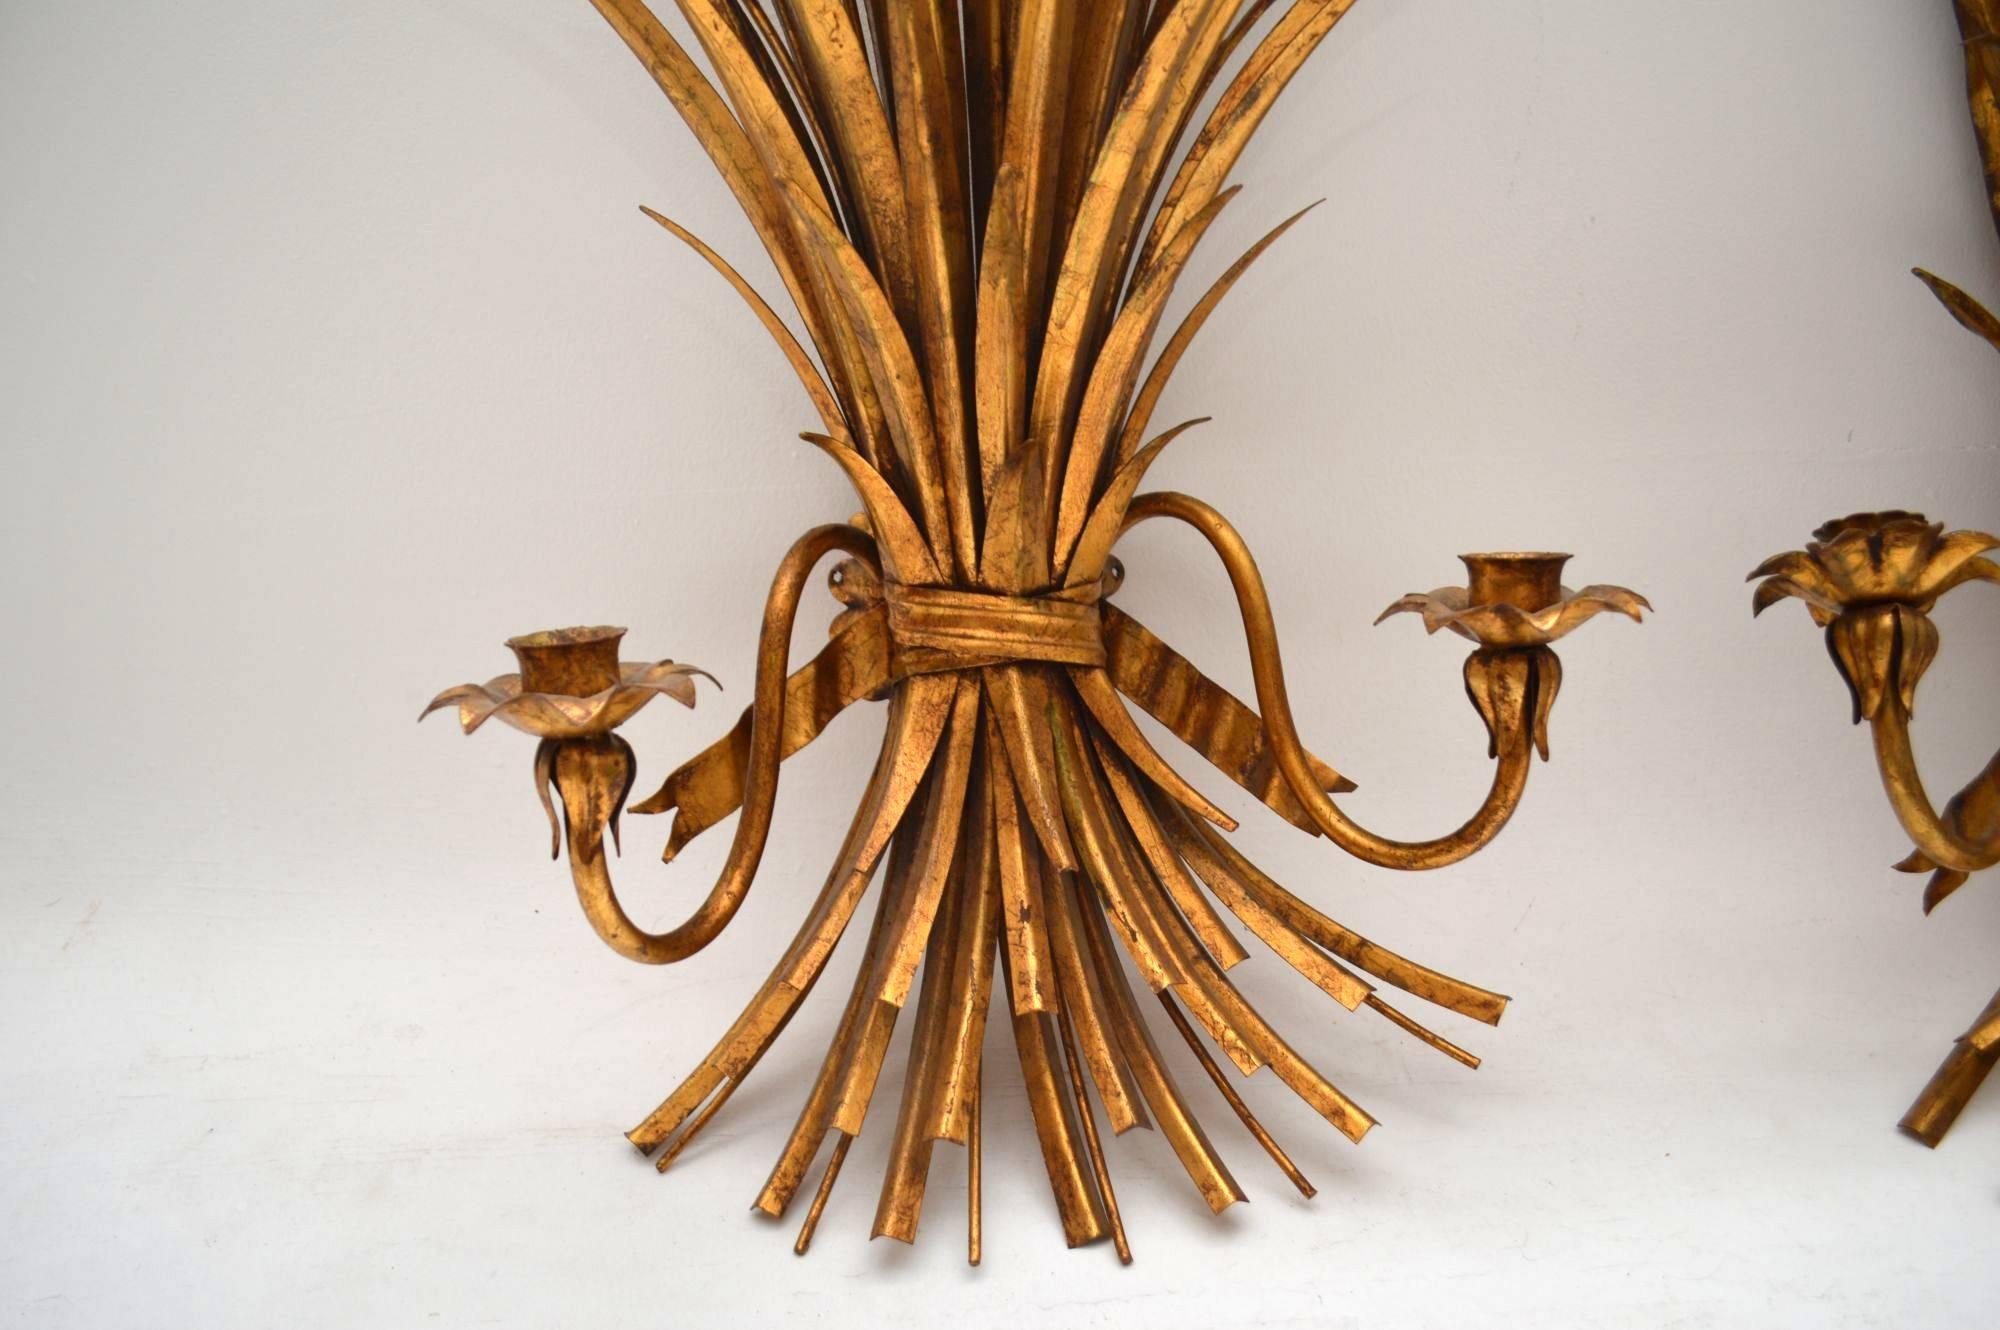 Pair of large original 1950s Italian gilt wheat sheaf wall sconces in good original condition. It’s quite rare to find them this large and in such good condition. The are basically gold leaf on wrought iron or what is commonly known as Tole